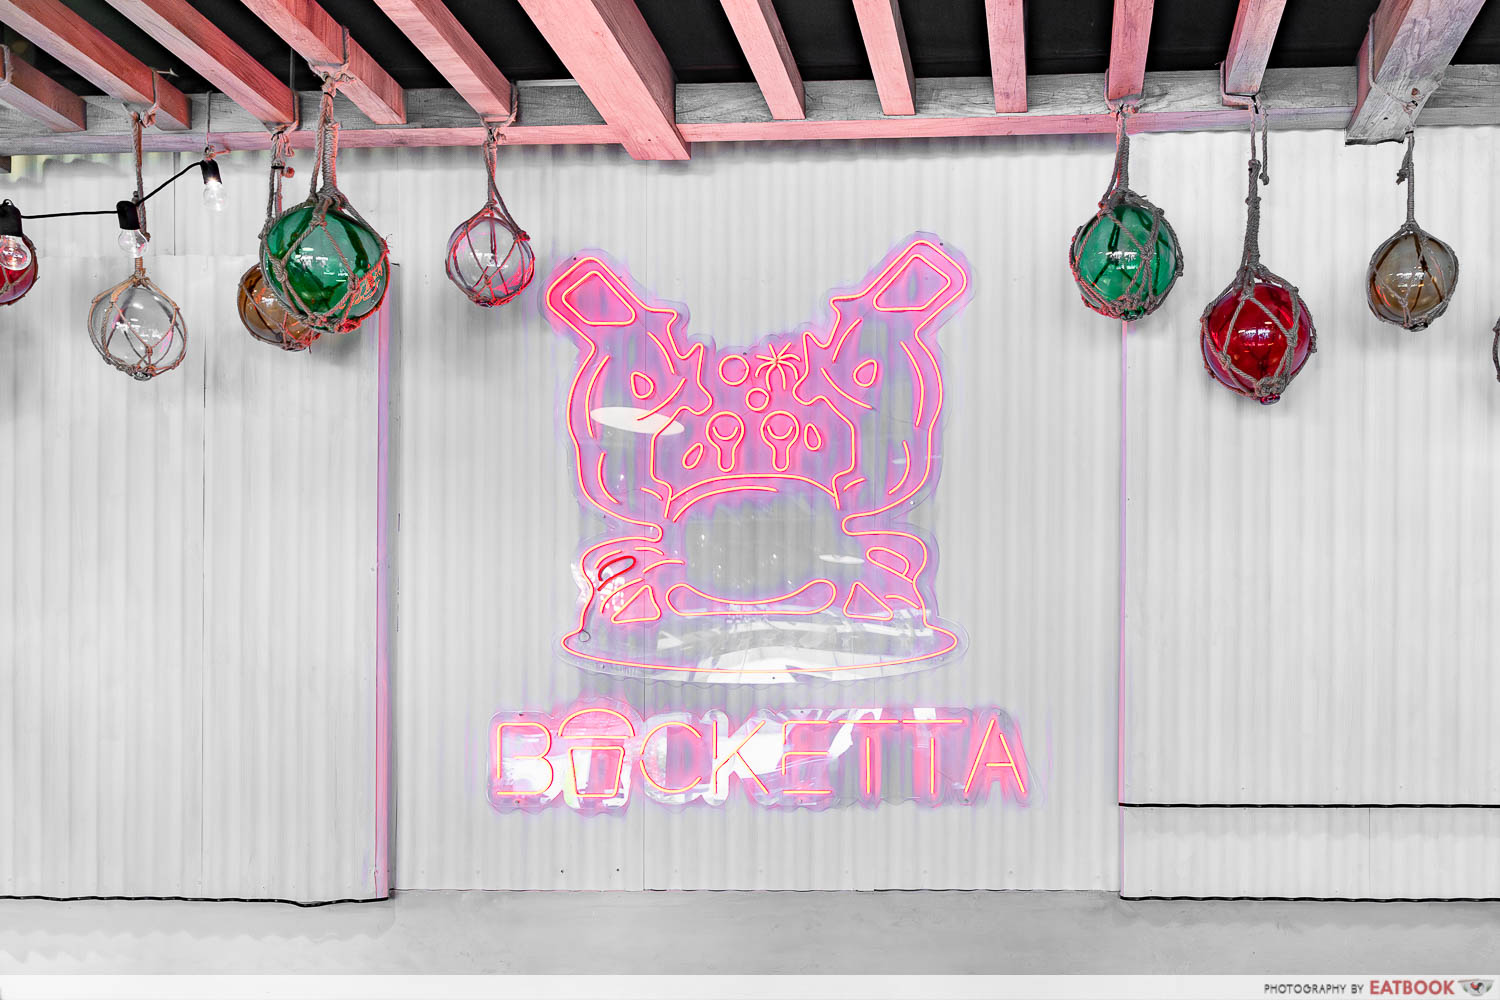 bucketta-downtown-east-storefront